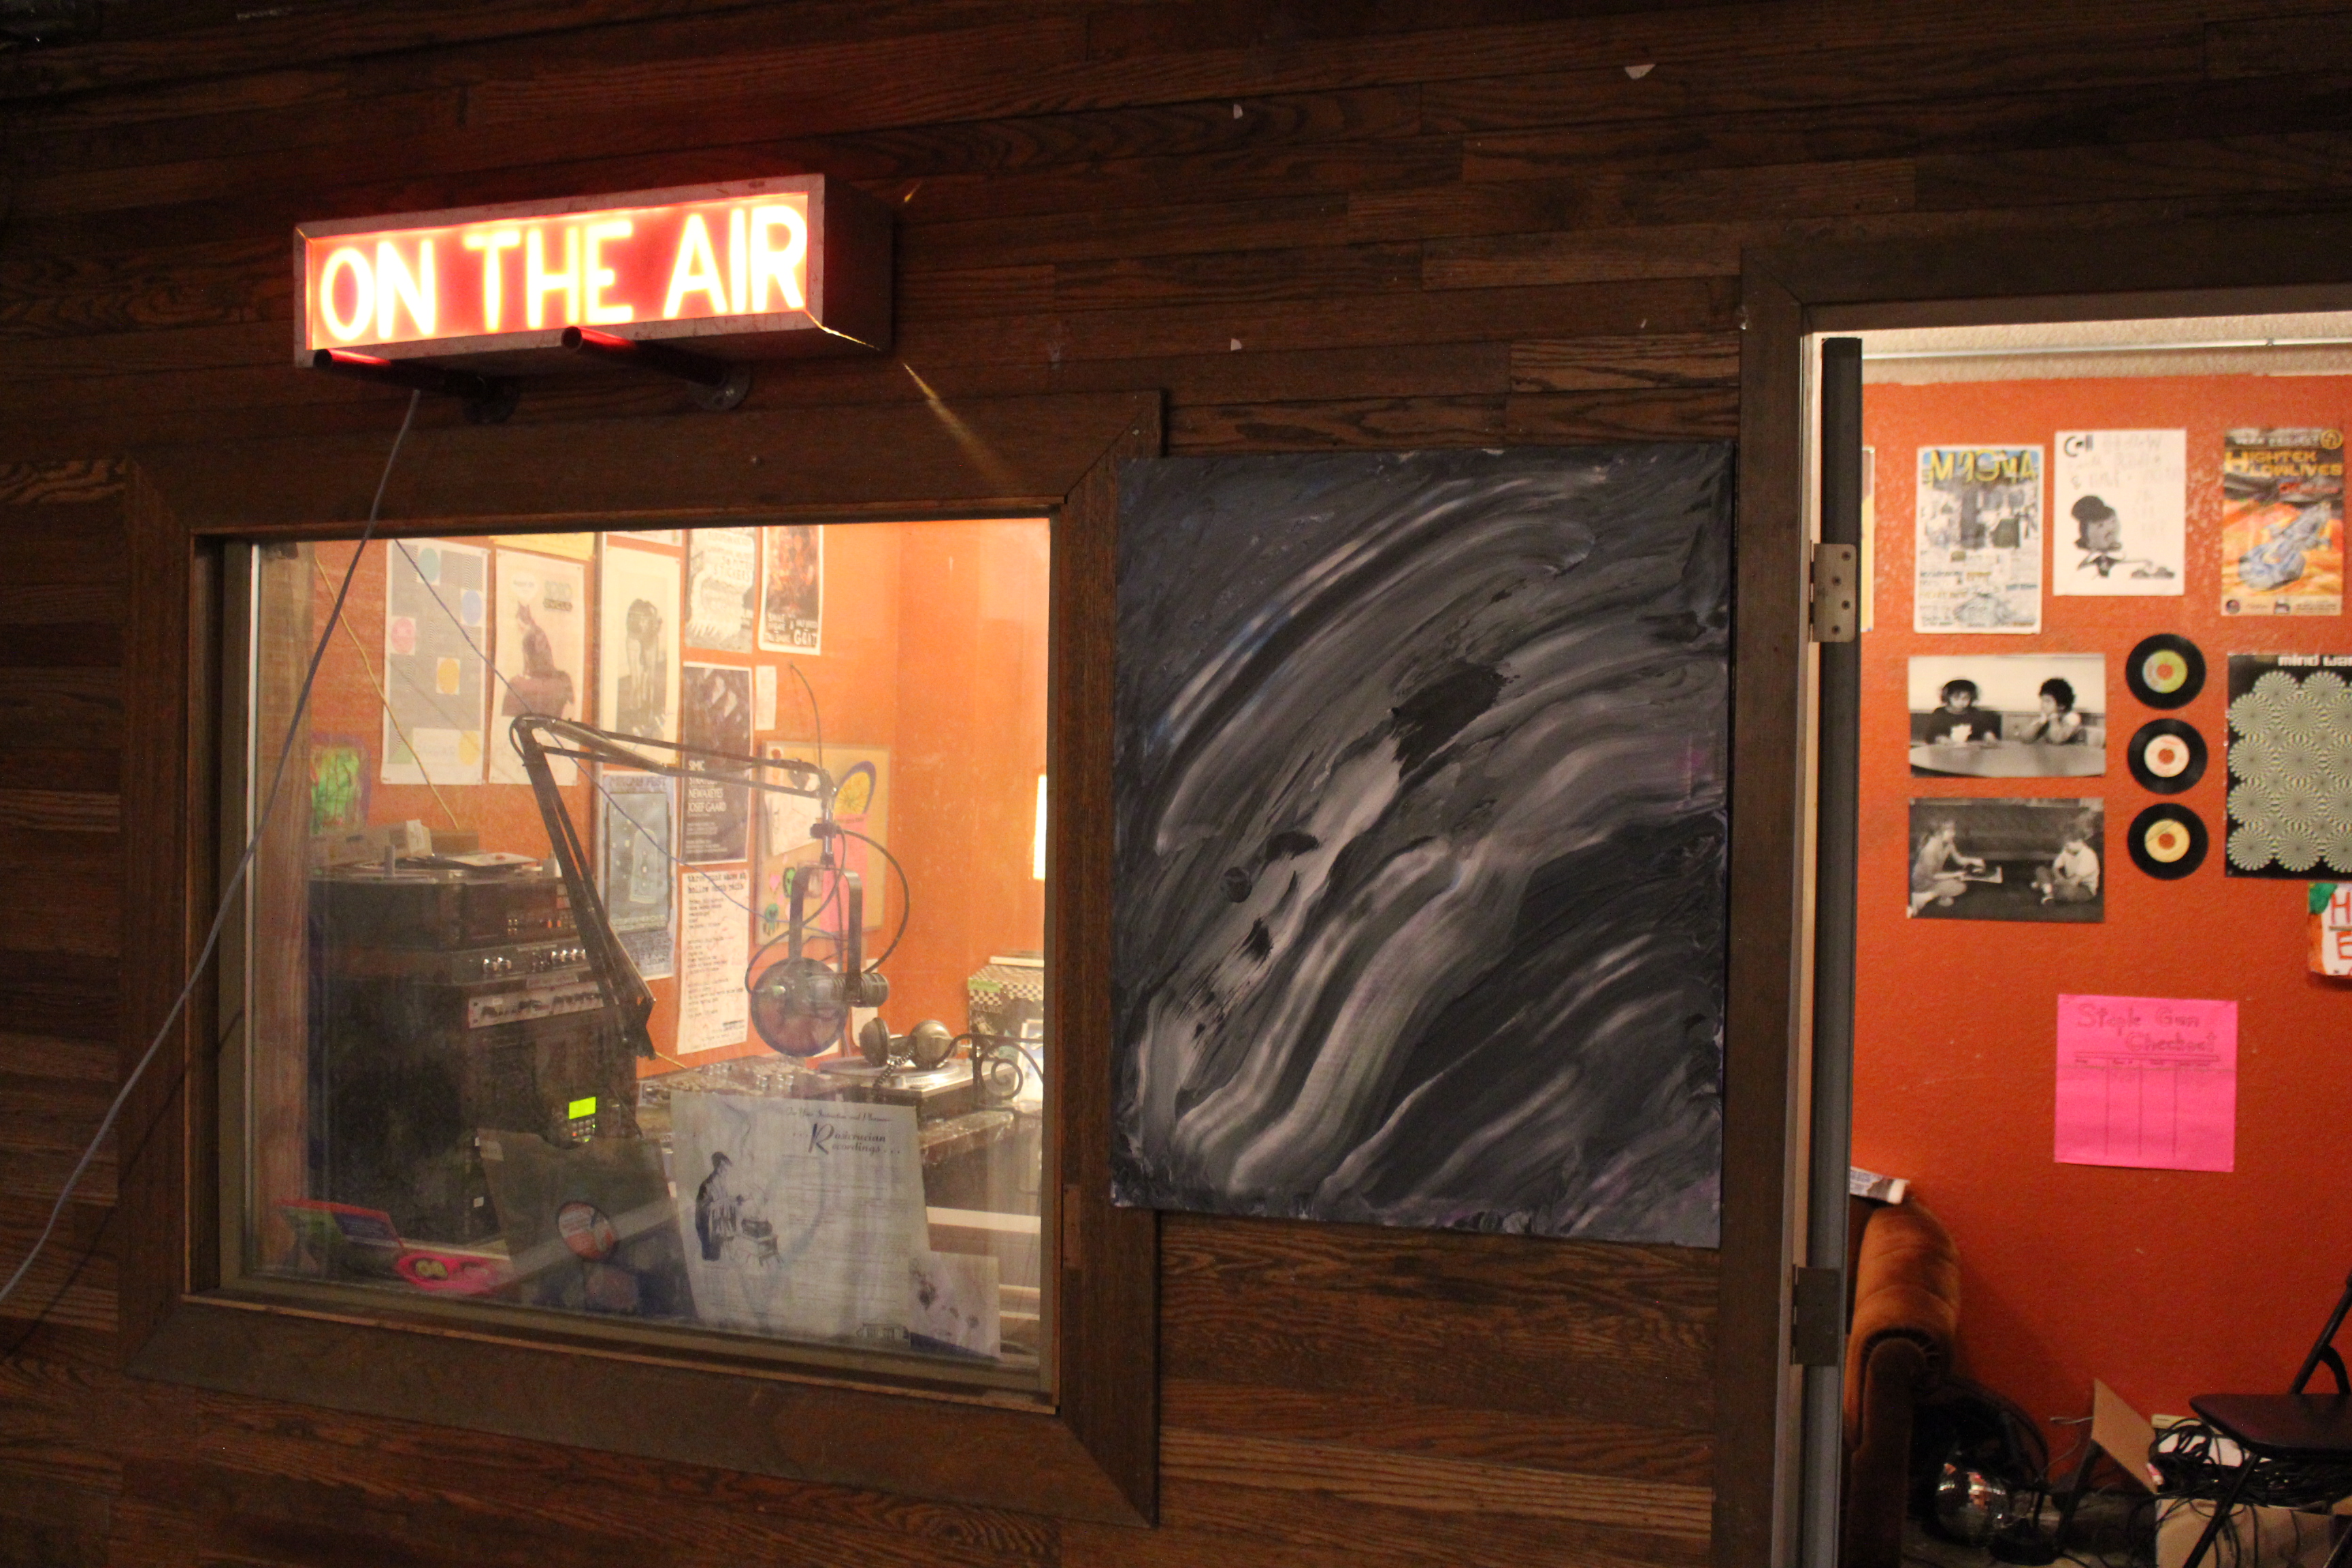 Hollow Earth studio is located in the Central District, and is "on the air" online now. Photo by Sara Bernard